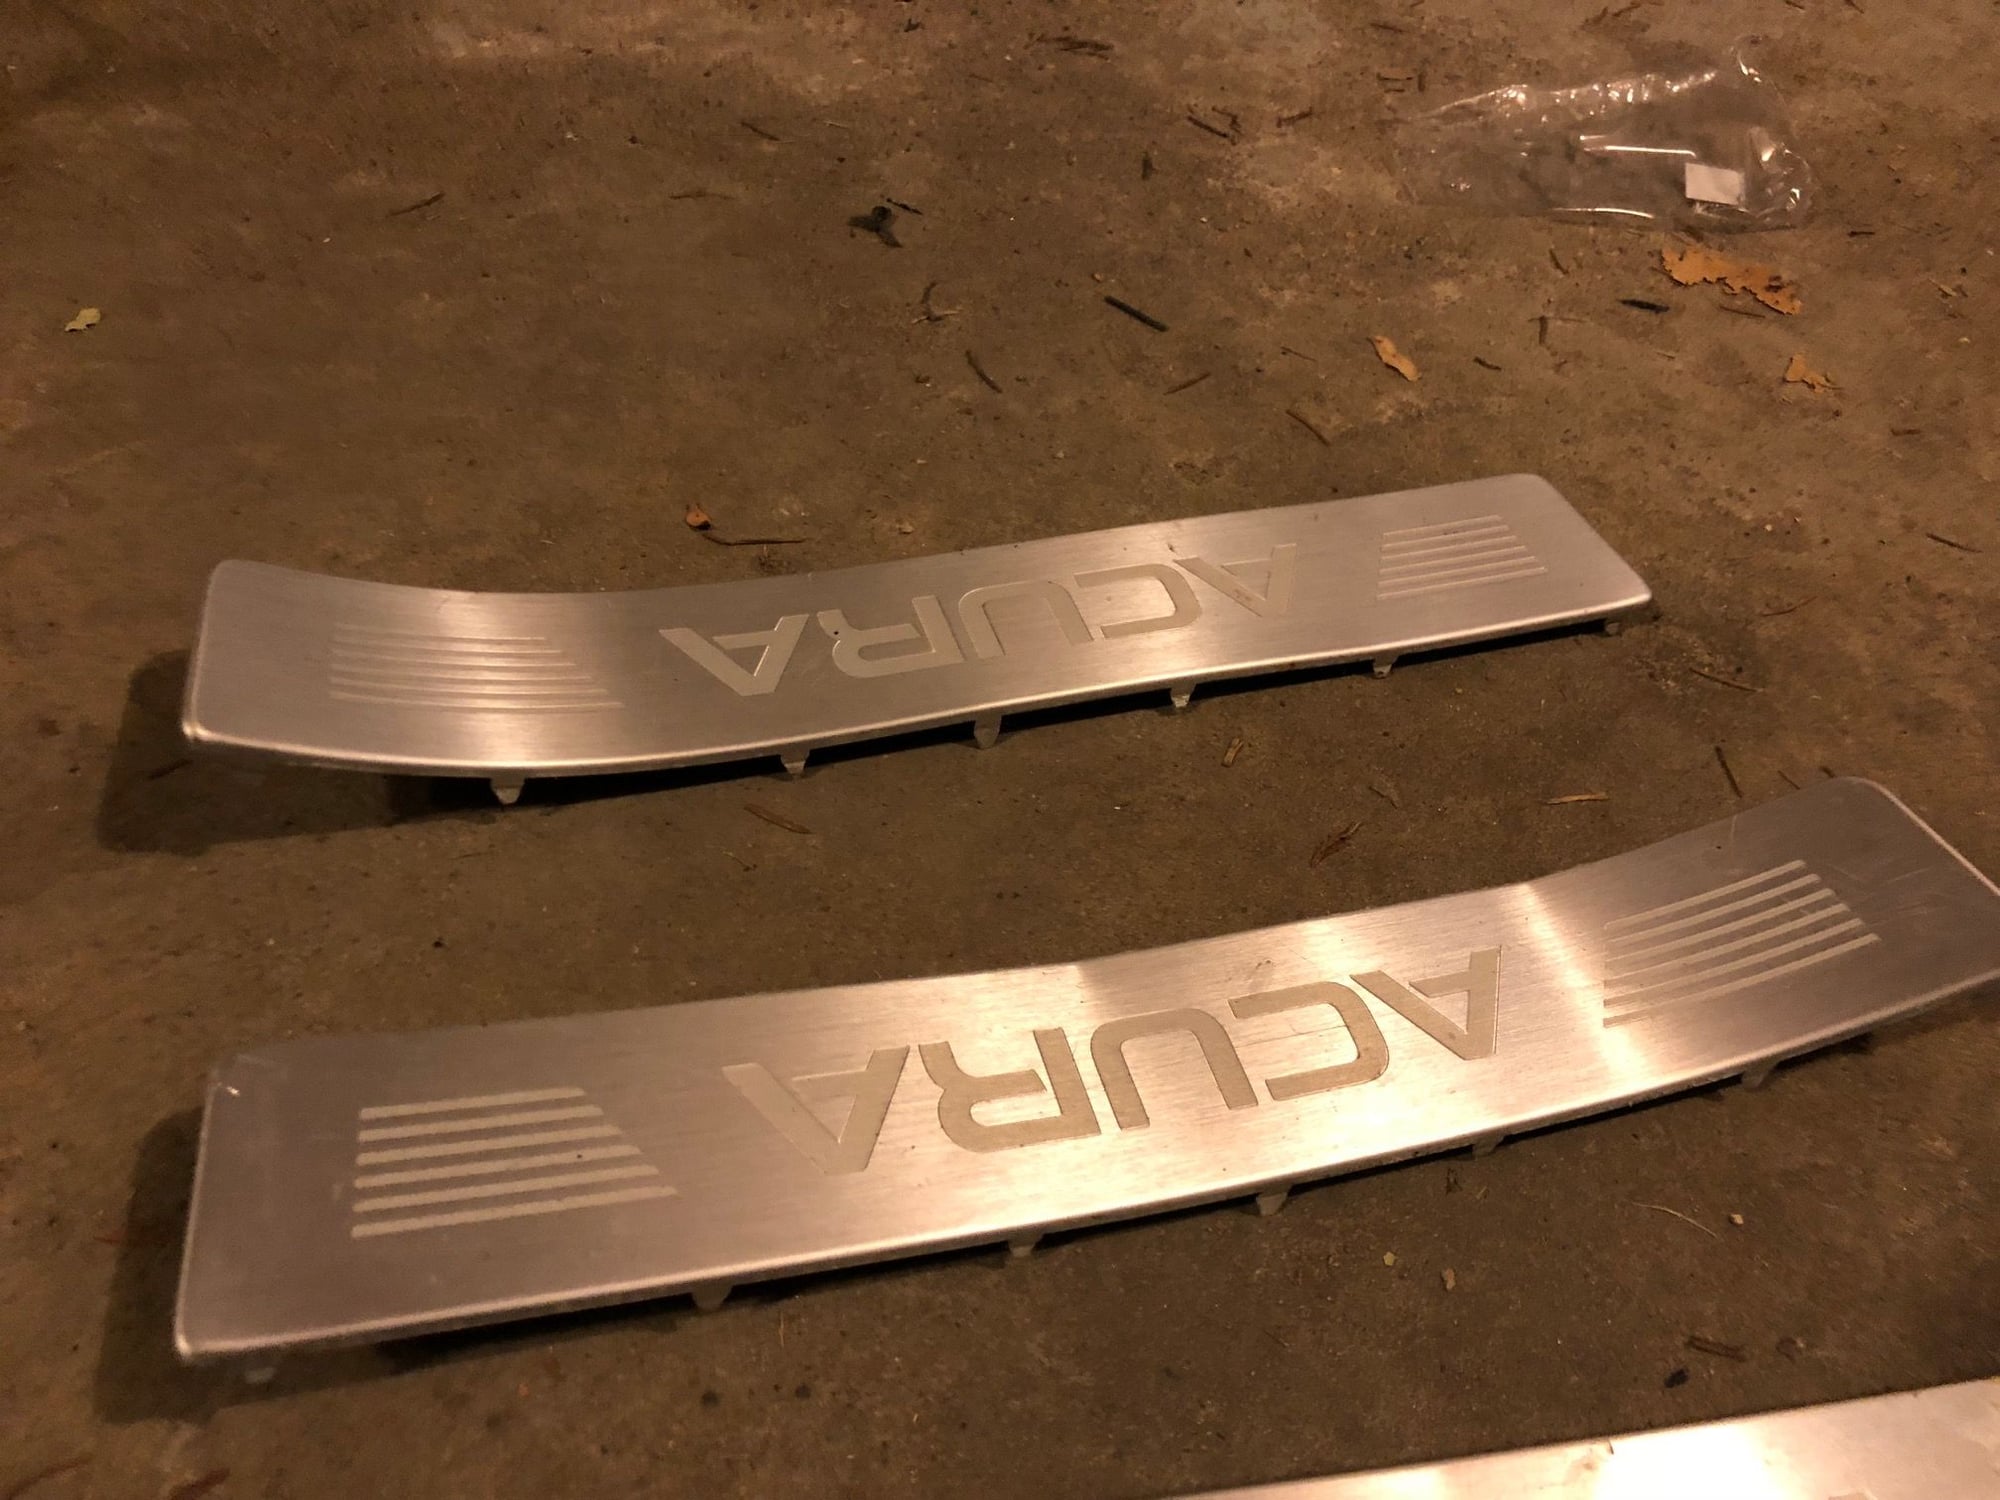 Interior/Upholstery - EXPIRED: FS: 3G Acura TL (2004-2008) Front and Rear Door Sills - Used - 2004 to 2008 Acura TL - Baraboo, WI 53913, United States